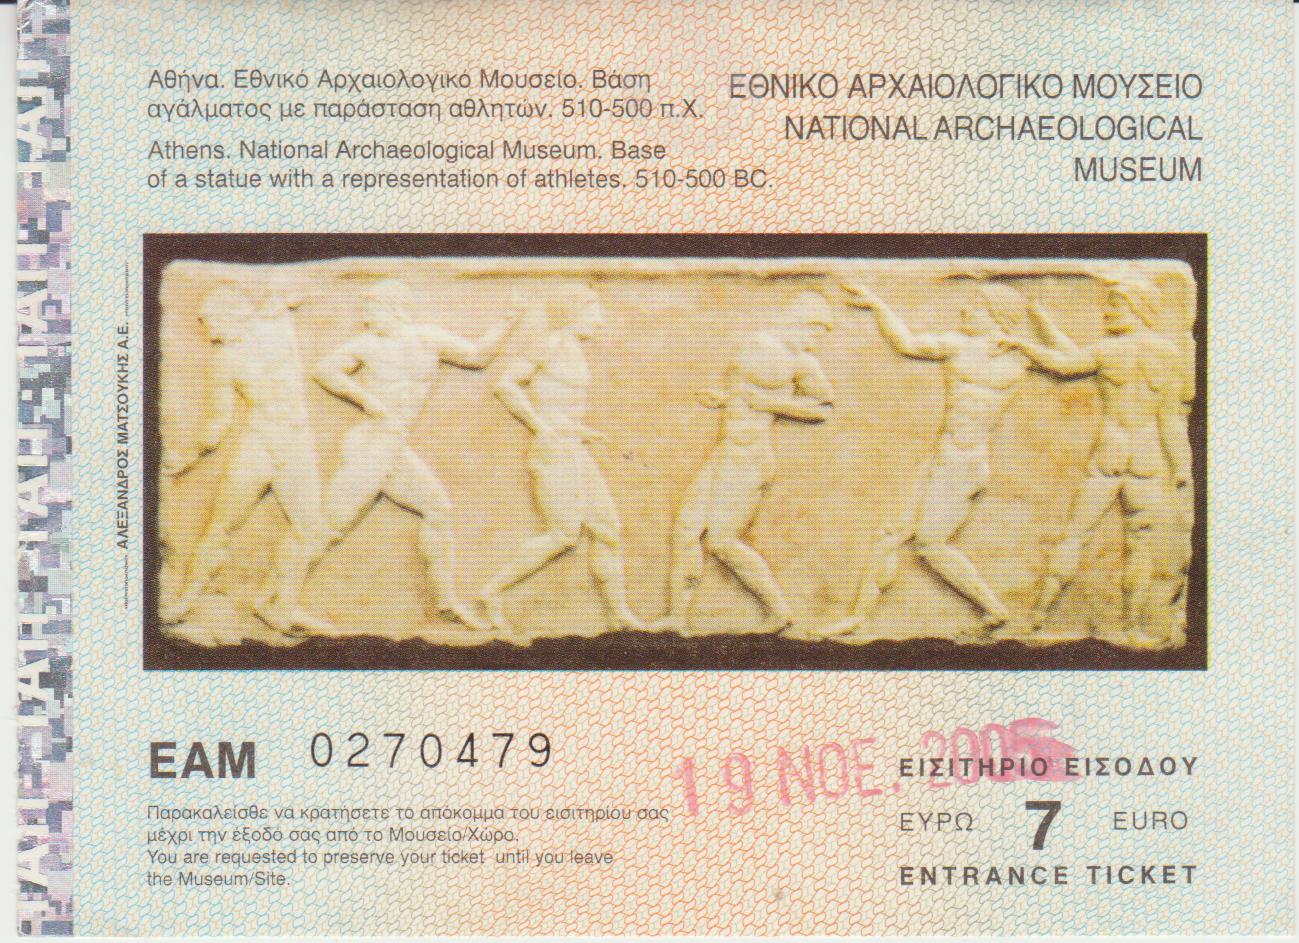 42) National Archeological Museum